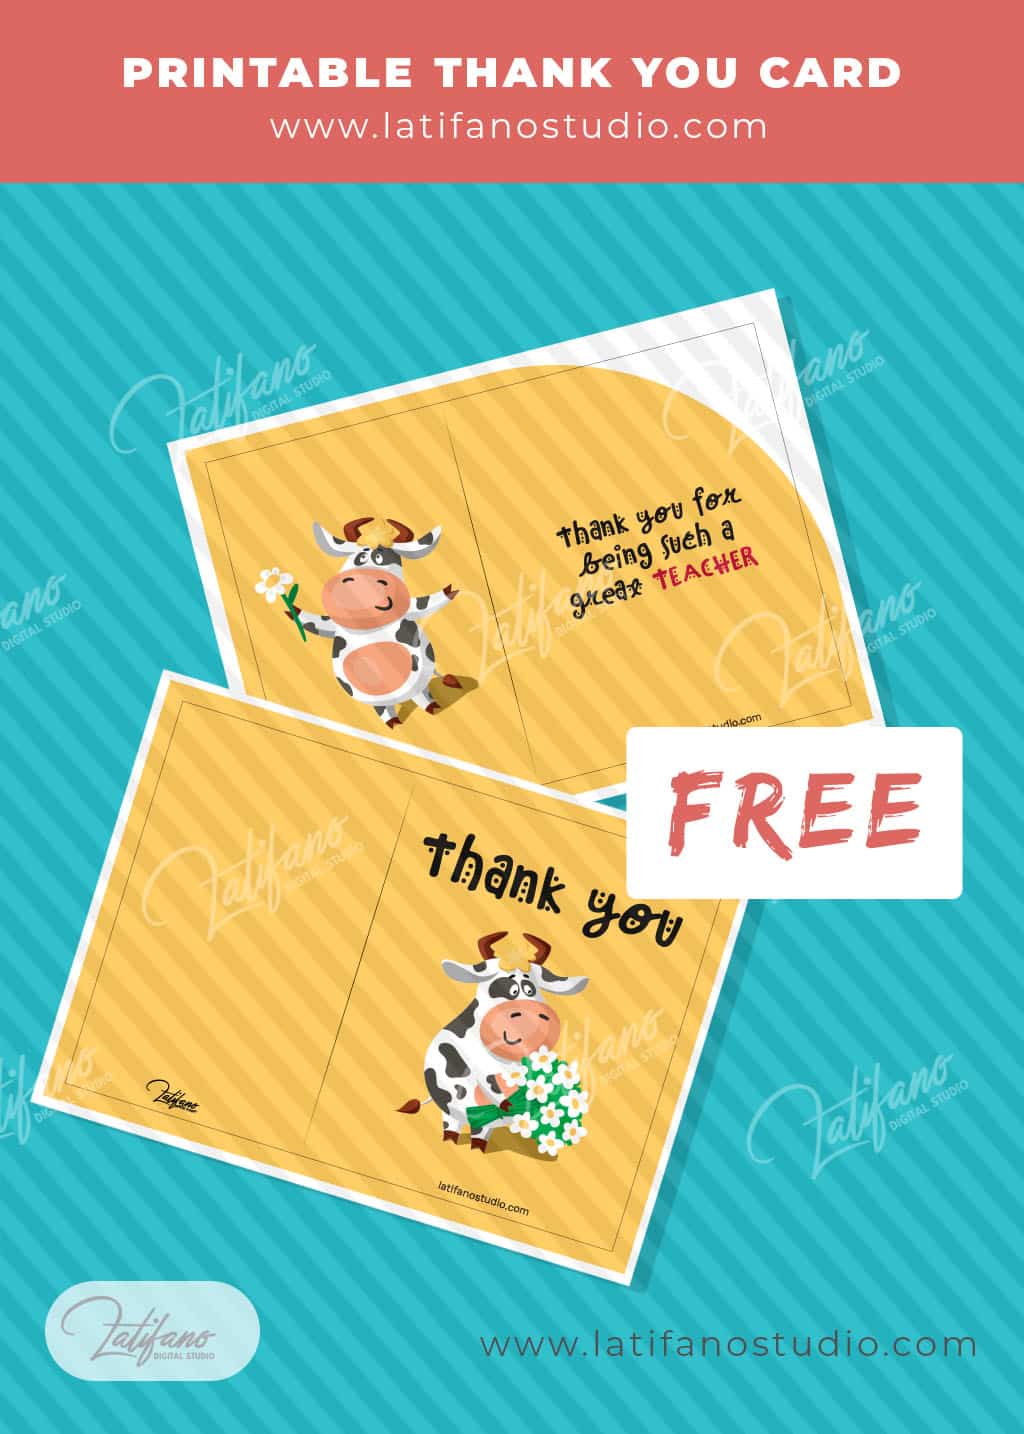 Printable Thank You Cards for your Teacher